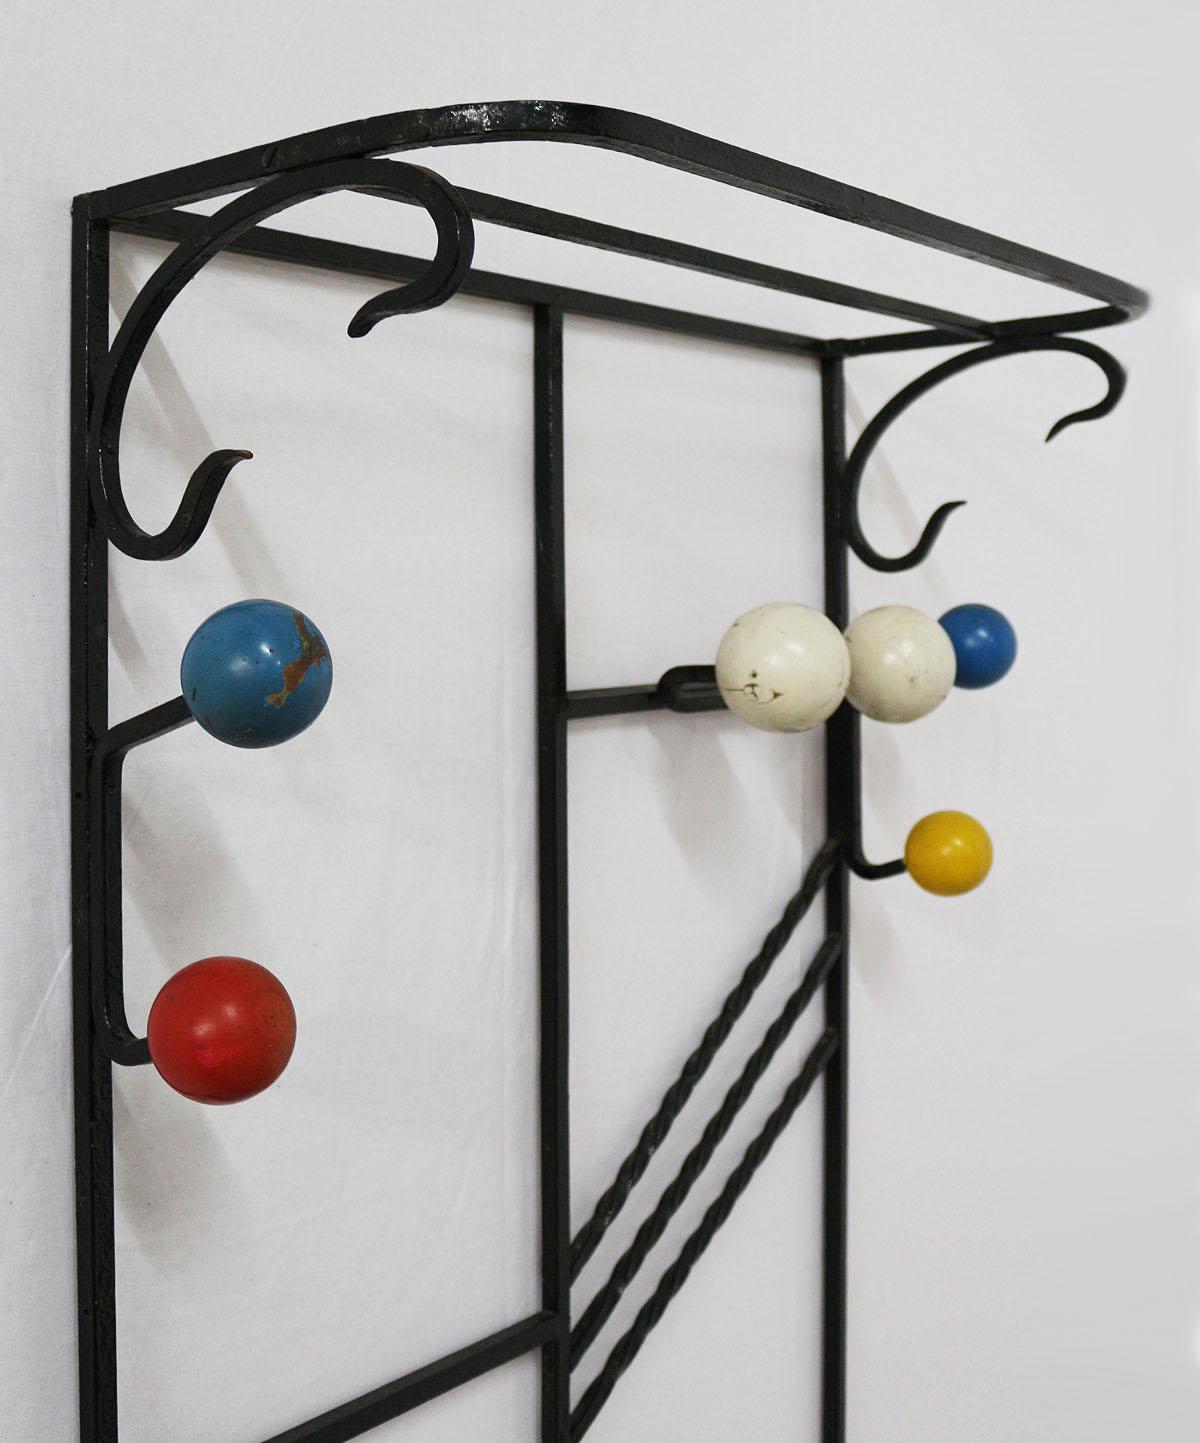 Vintage original French midcentury coat and hat rack hall stand
Designed by Roger Feraud. 
Lacquered metal with colored wooden balls. 
Unusual model. 
Architectural.